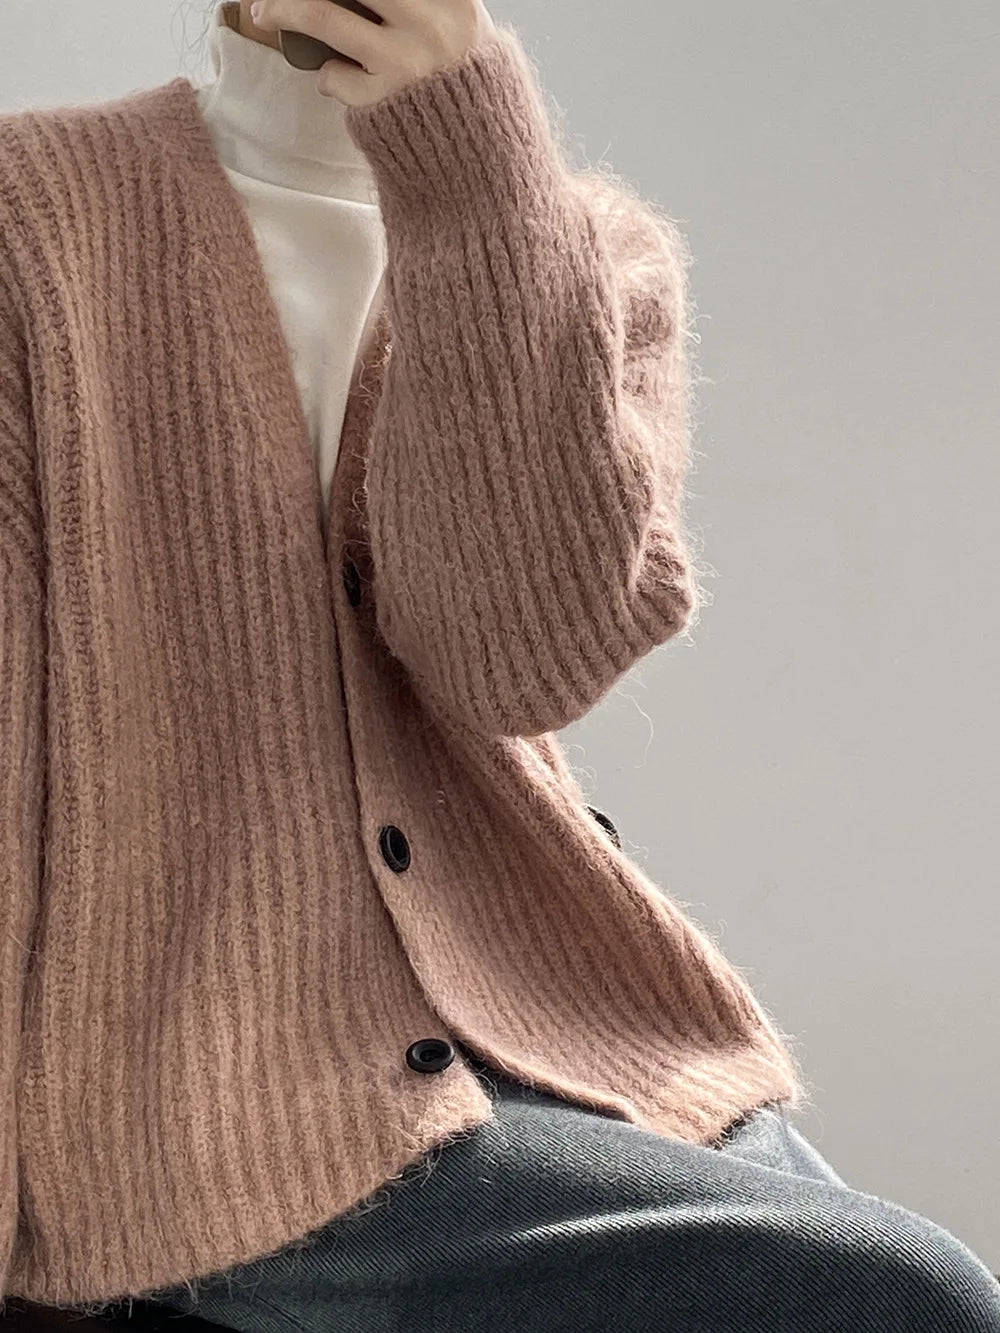 [Korean Style] V Neck Loose Fit Single Breasted Sweater Cardigan